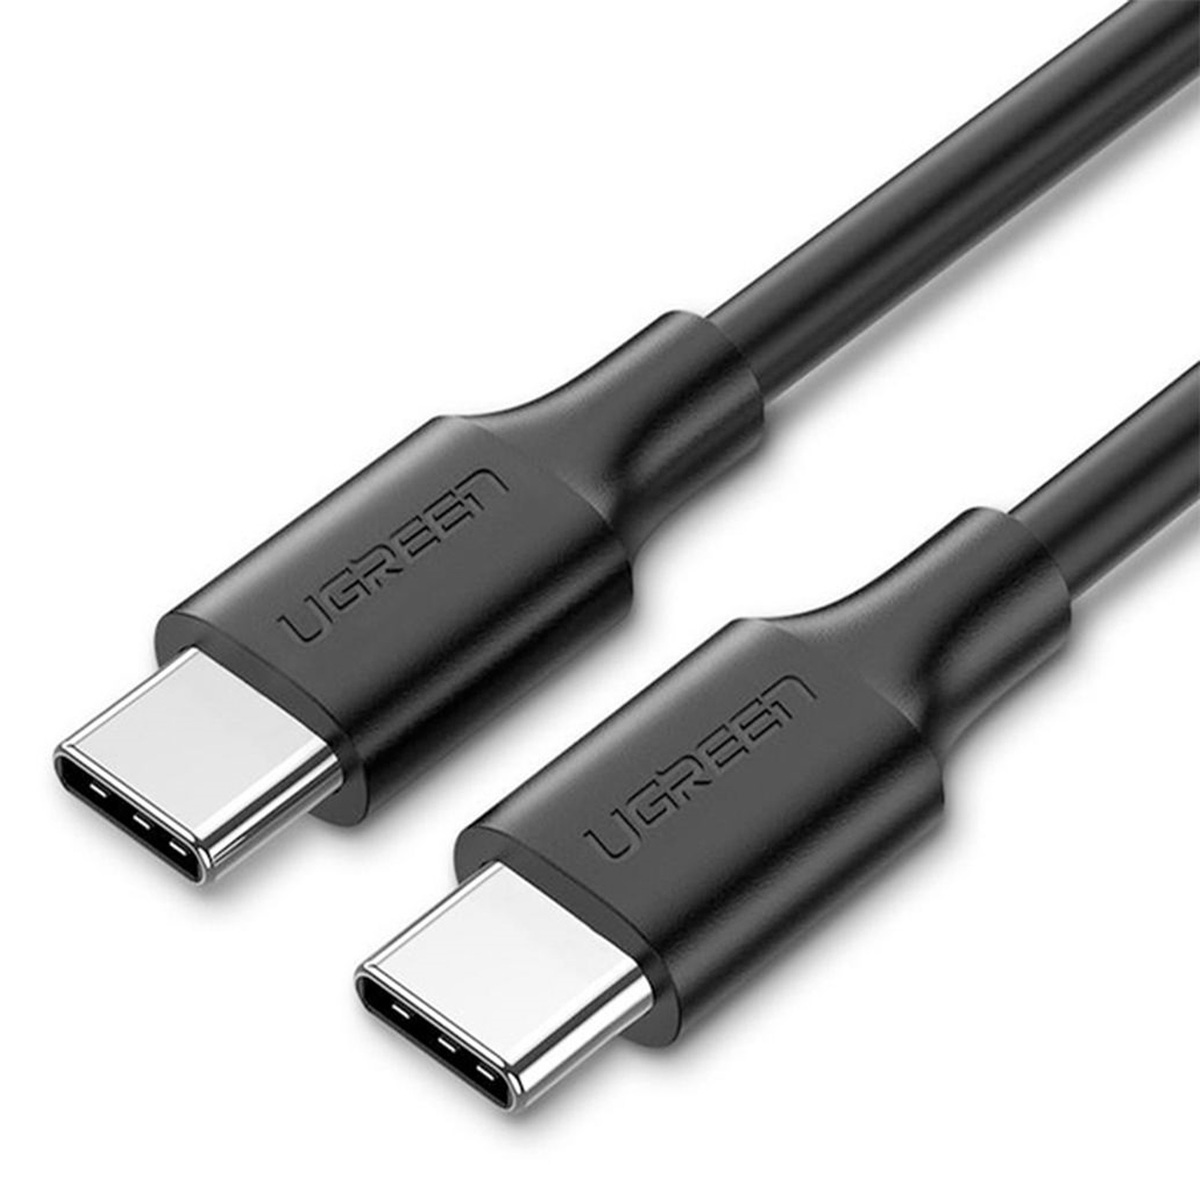 Ugreen USB 2.0 Type-C to Type-C Cable, 1 m, Black, US286-50997